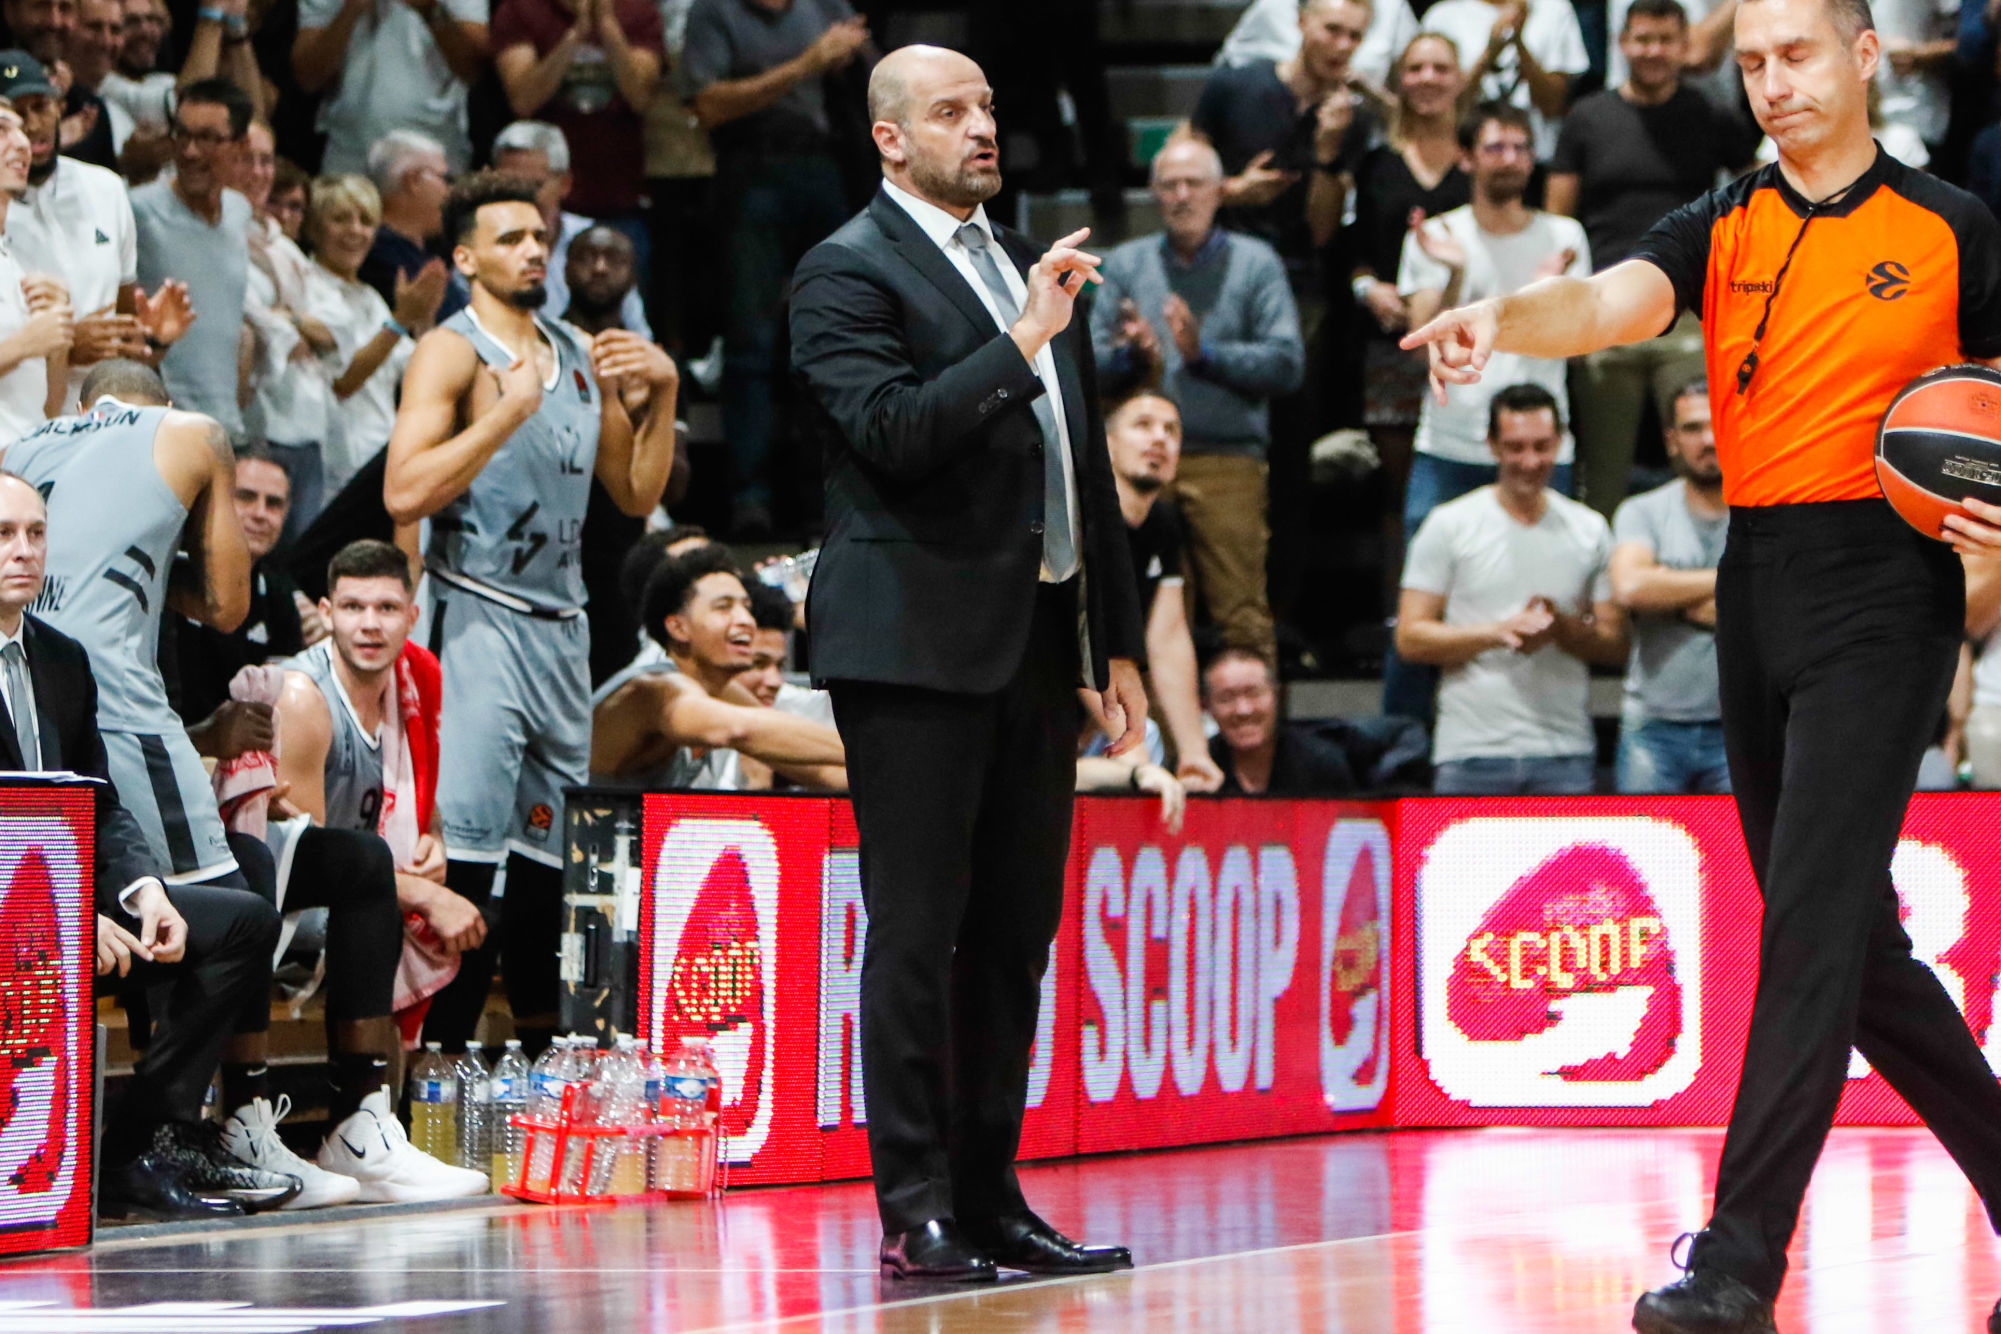 Zvezdan MITROVIC coach of Lyon and referee during the Euroligue match between Asvel and Panathinaikos at The Astroballe on October 10, 2019 in Villeurbanne, France. (Photo by Romain Biard/Icon Sport) - Zvezdan MITROVIC - Astroballe - Villeurbanne (France)